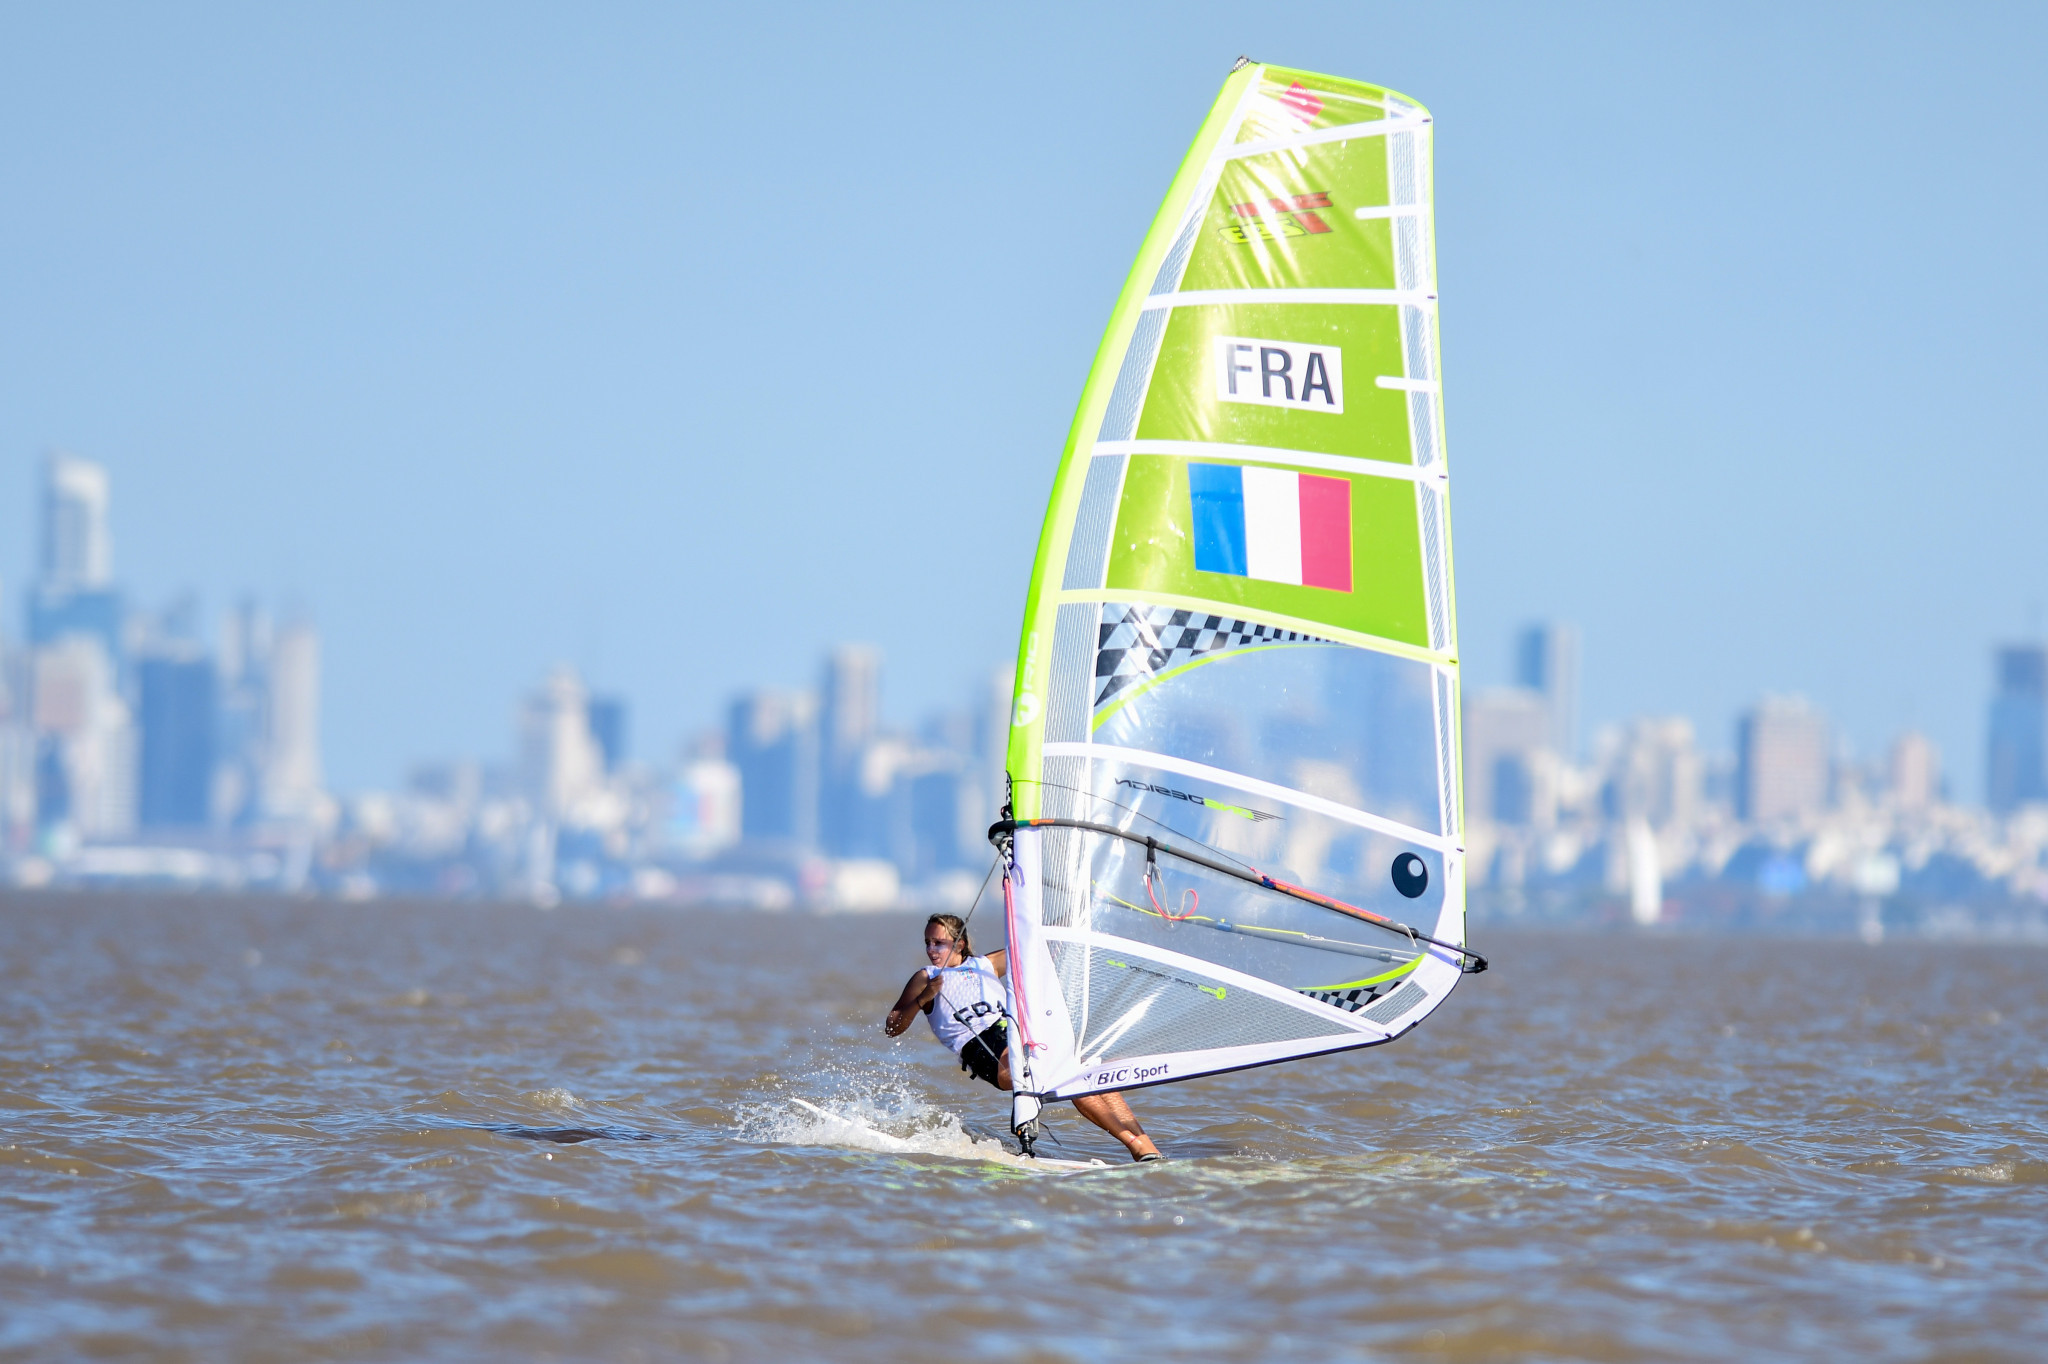 Giorgia Speciale struck gold in the women's windsurfing event ©Getty Images